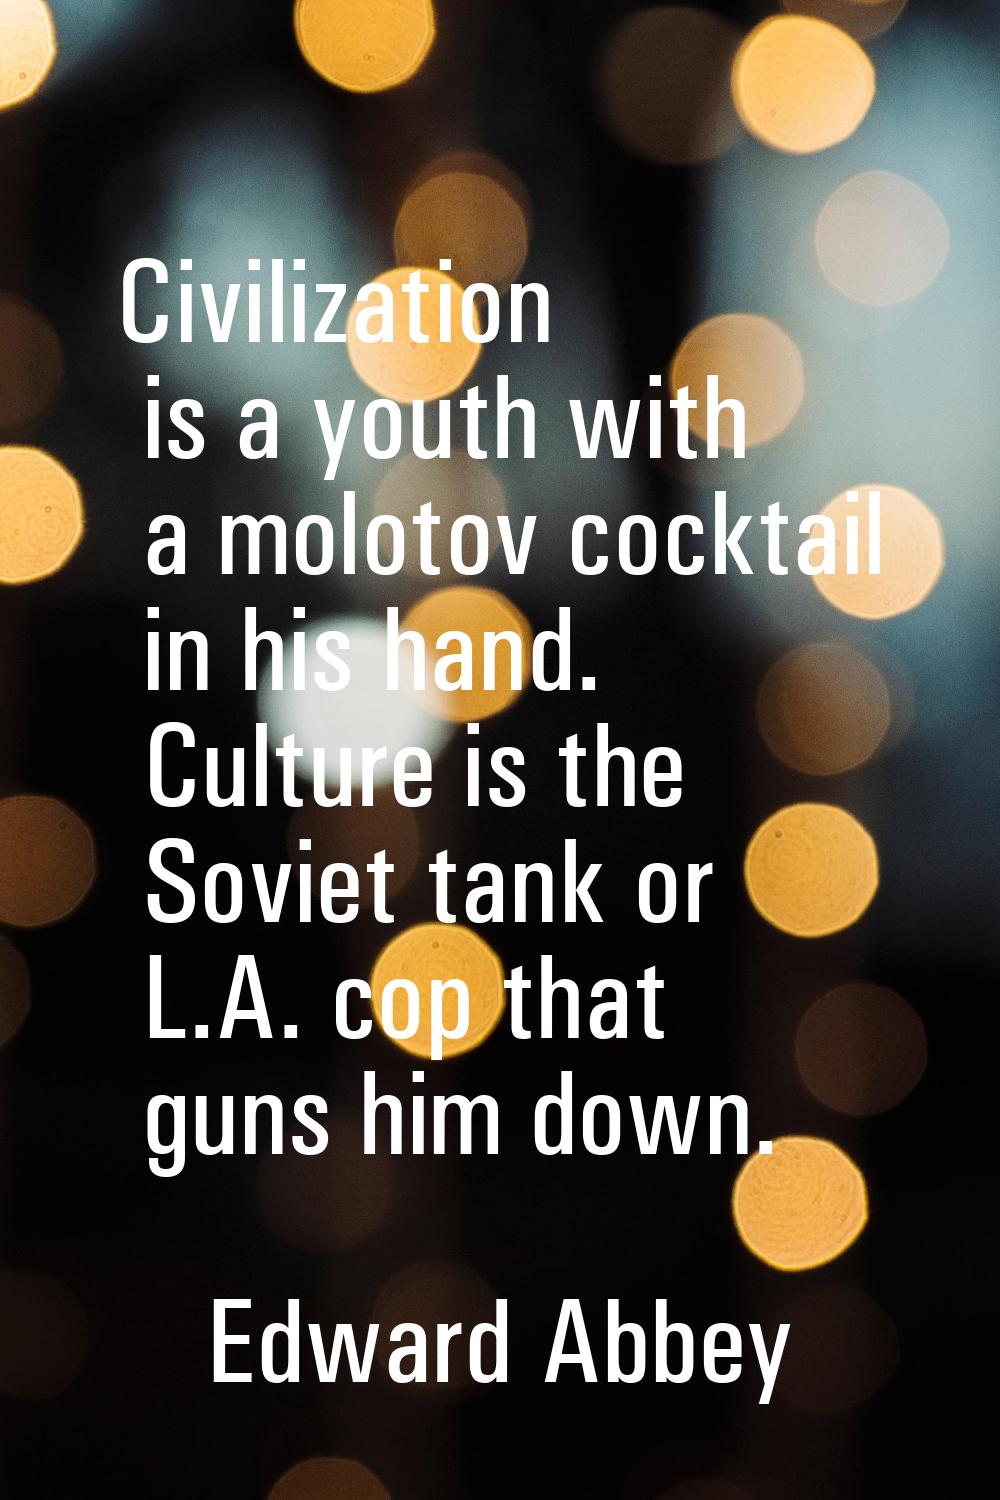 Civilization is a youth with a molotov cocktail in his hand. Culture is the Soviet tank or L.A. cop